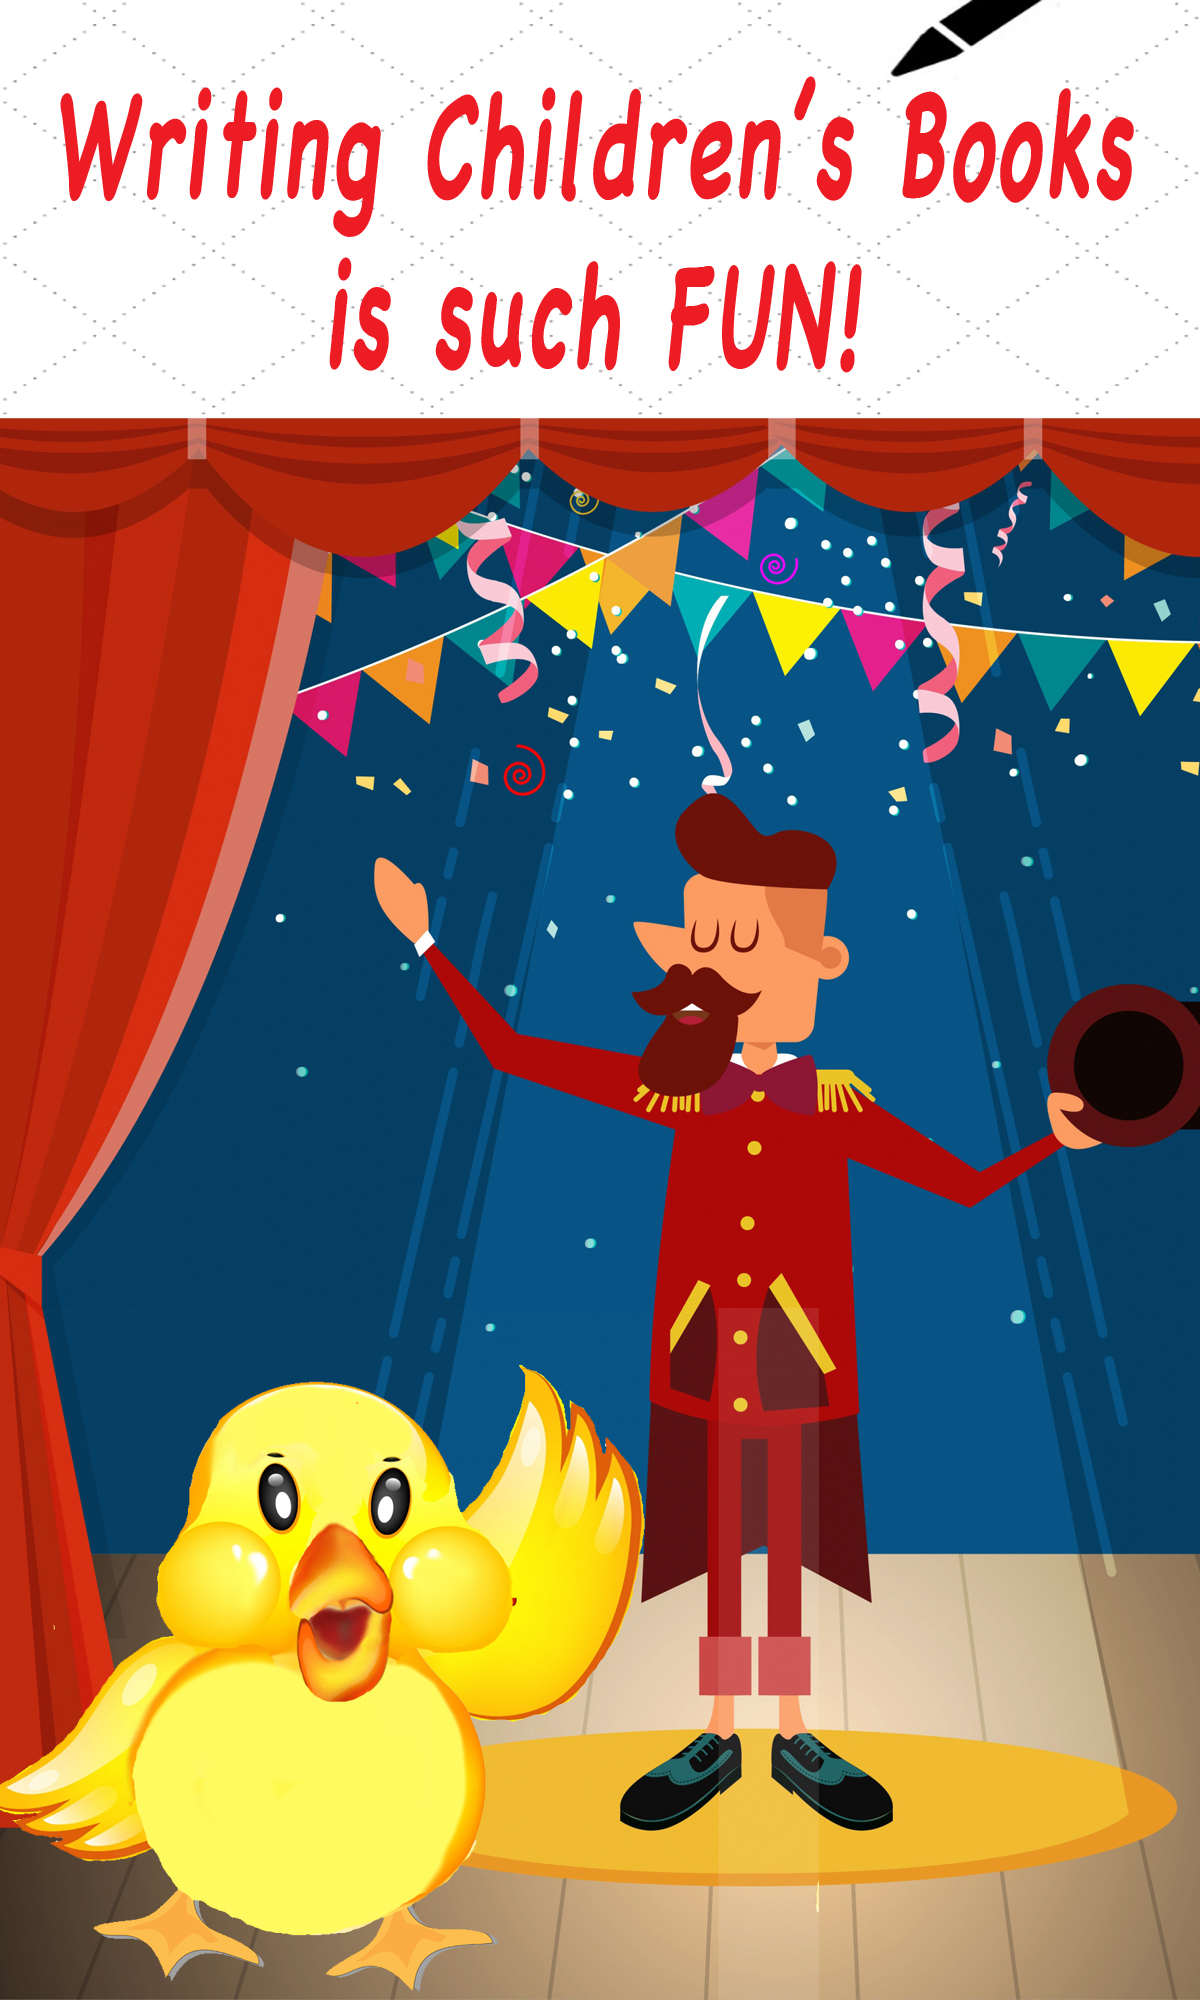 A picture of a fluffy yellow toy duck upstaging the flamboyant circus manager on stage, with words saying, “Writing Children’s Books is Such FUN!”